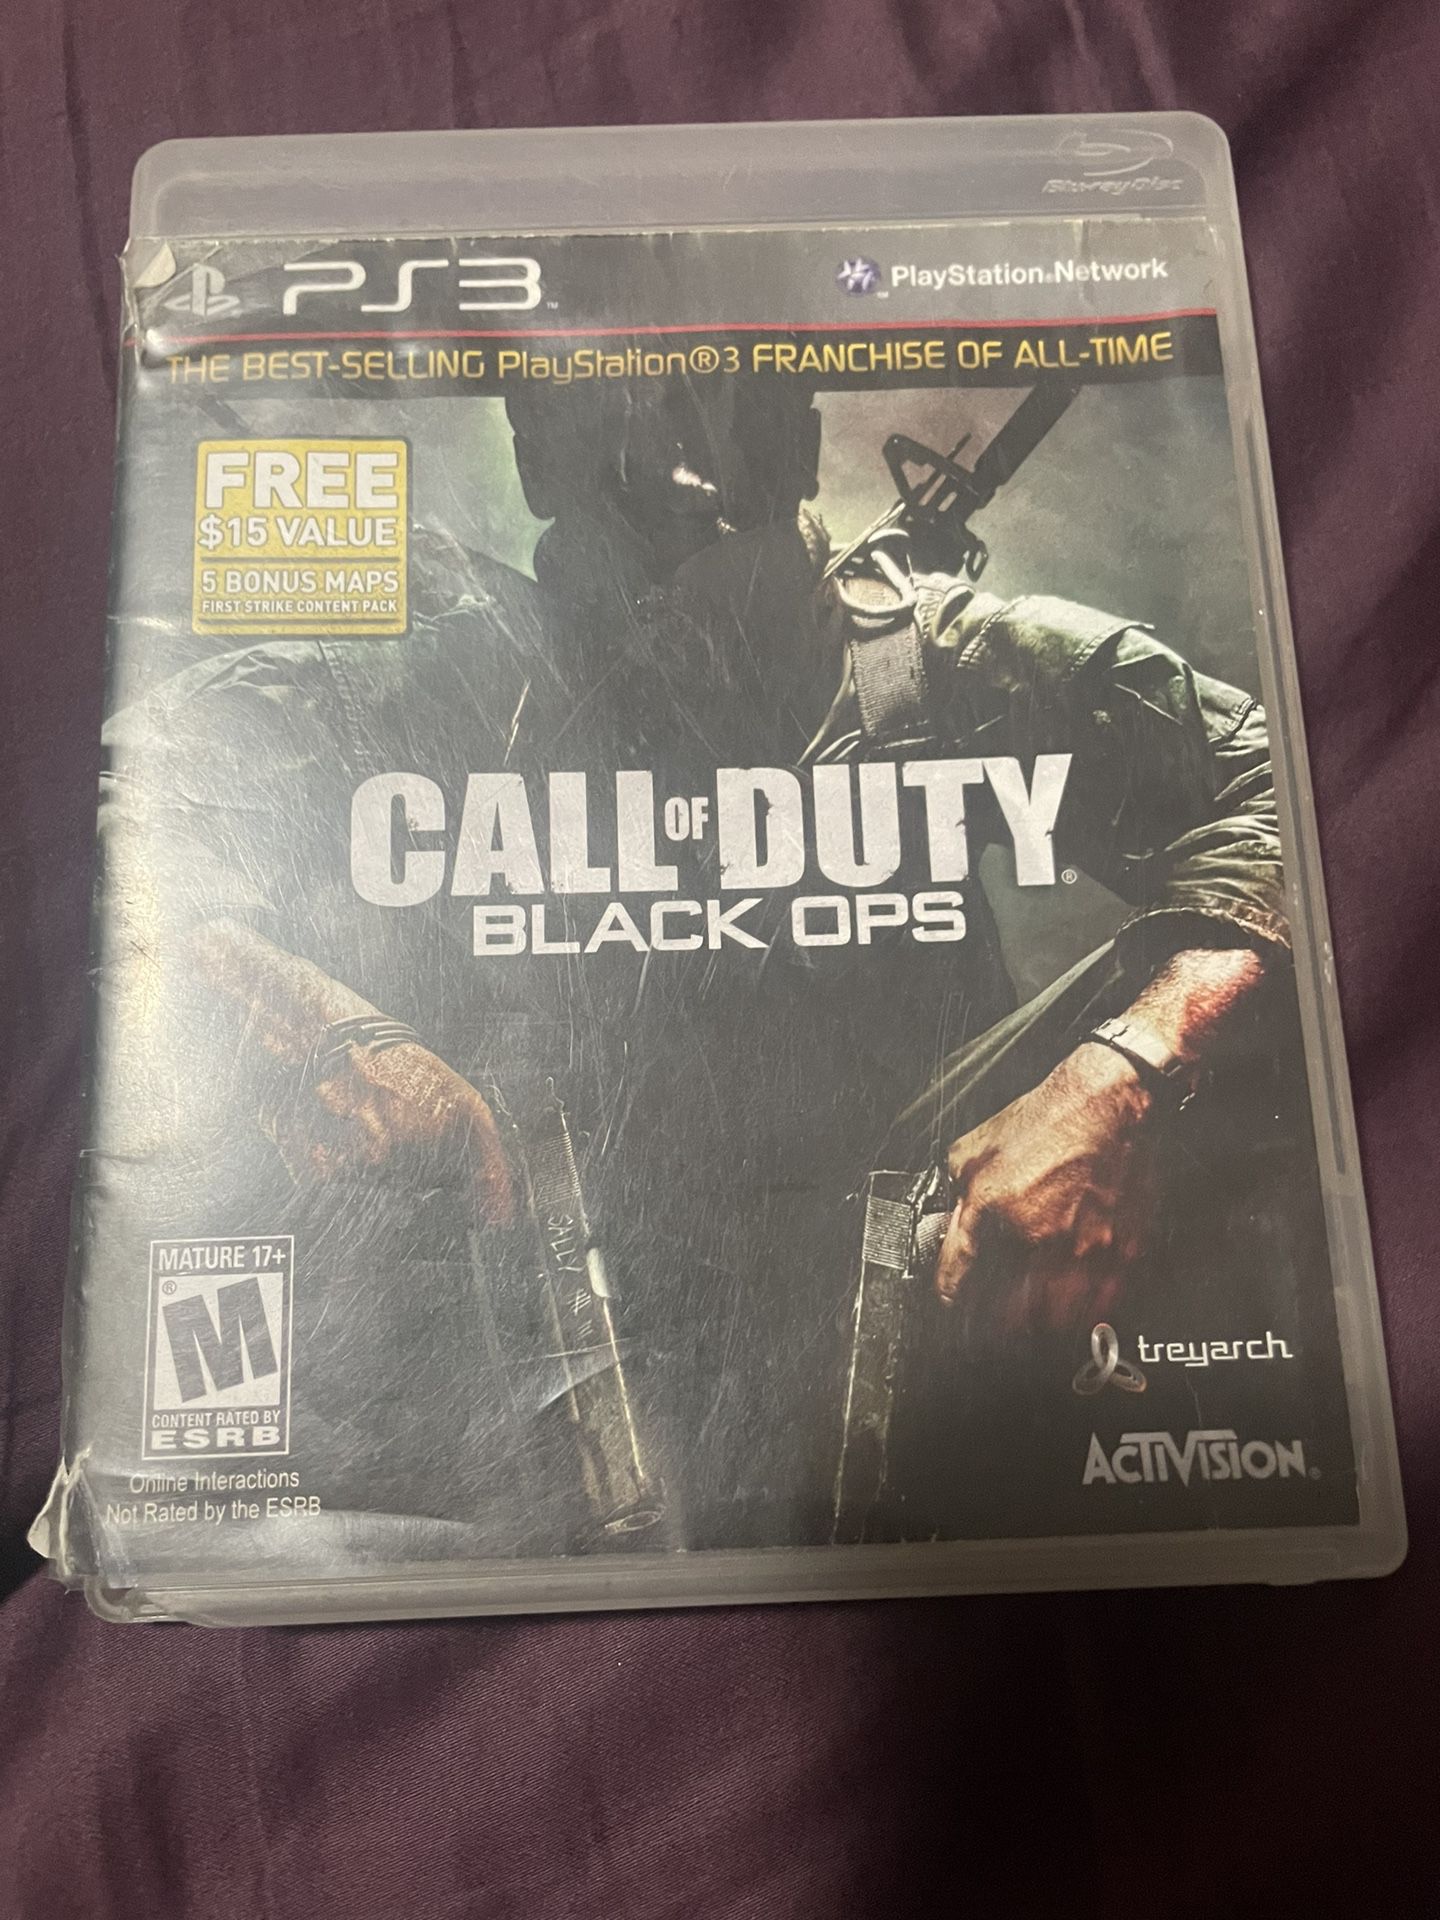 Black ops 1 for ps3